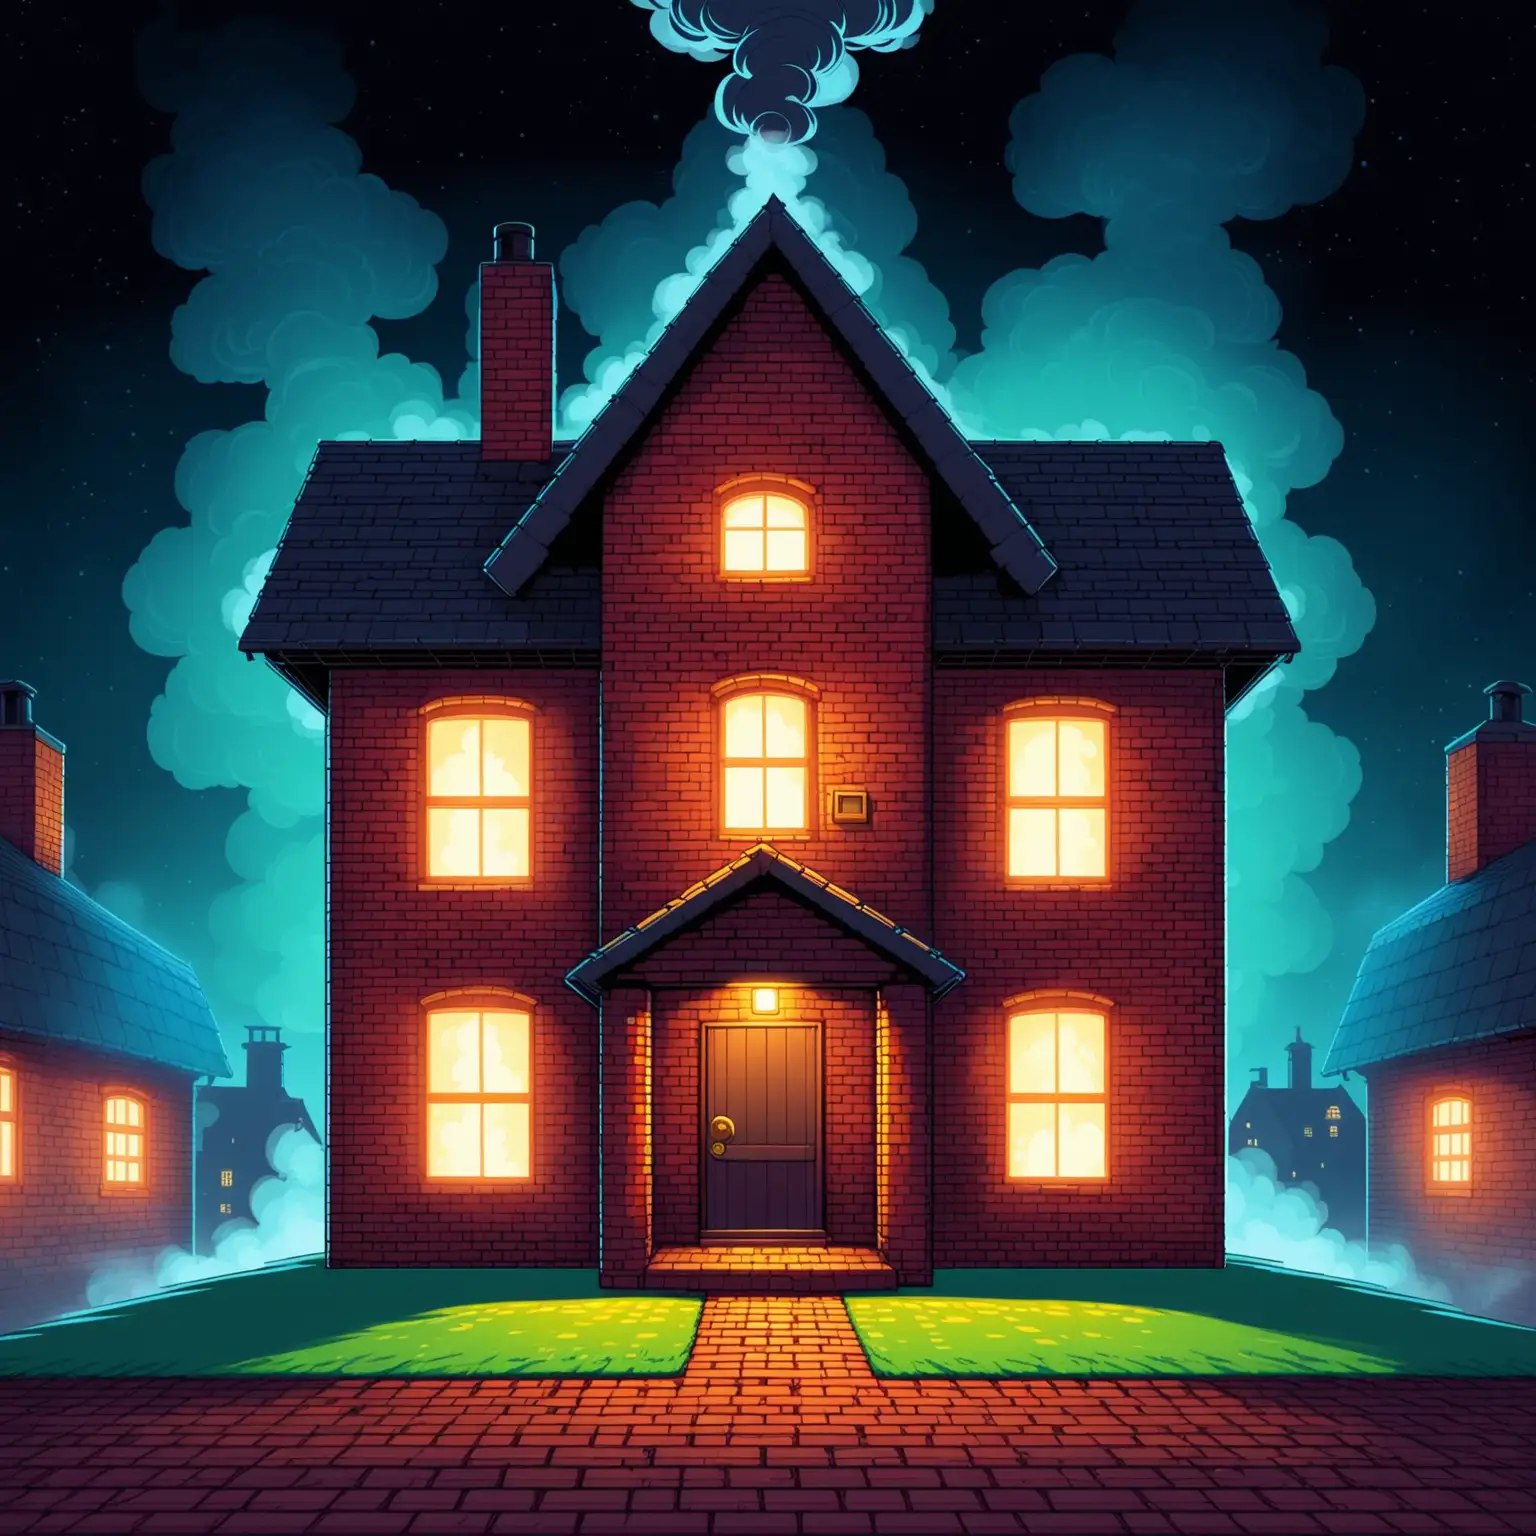 Point and Click game, Brick House with smoke everywhere night time, front view